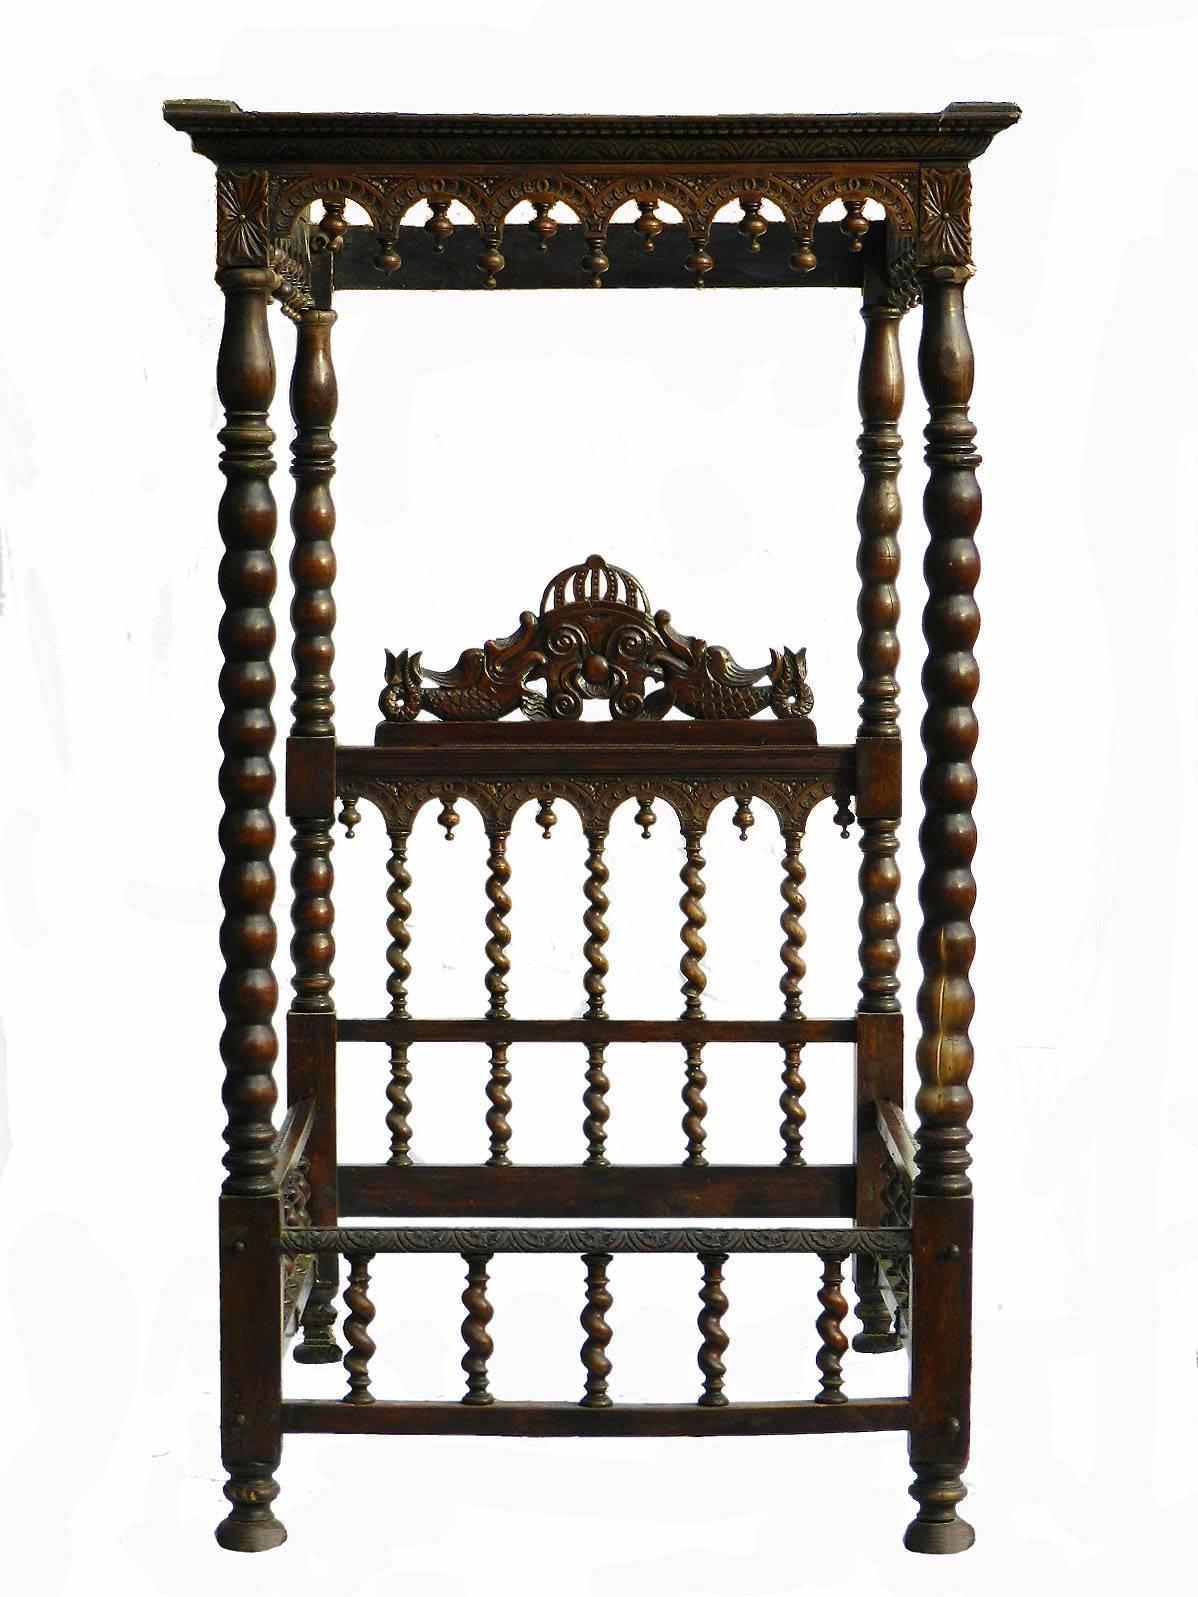 Unusual 19th century Portuguese Colonial four-poster single bed children’s daybed.
Very decorative heavy carved teak.
This bed will take a mattress 109cms (3'6") wide & 185cms (6') long.
The side bar height is 22cms (8.7").
The top